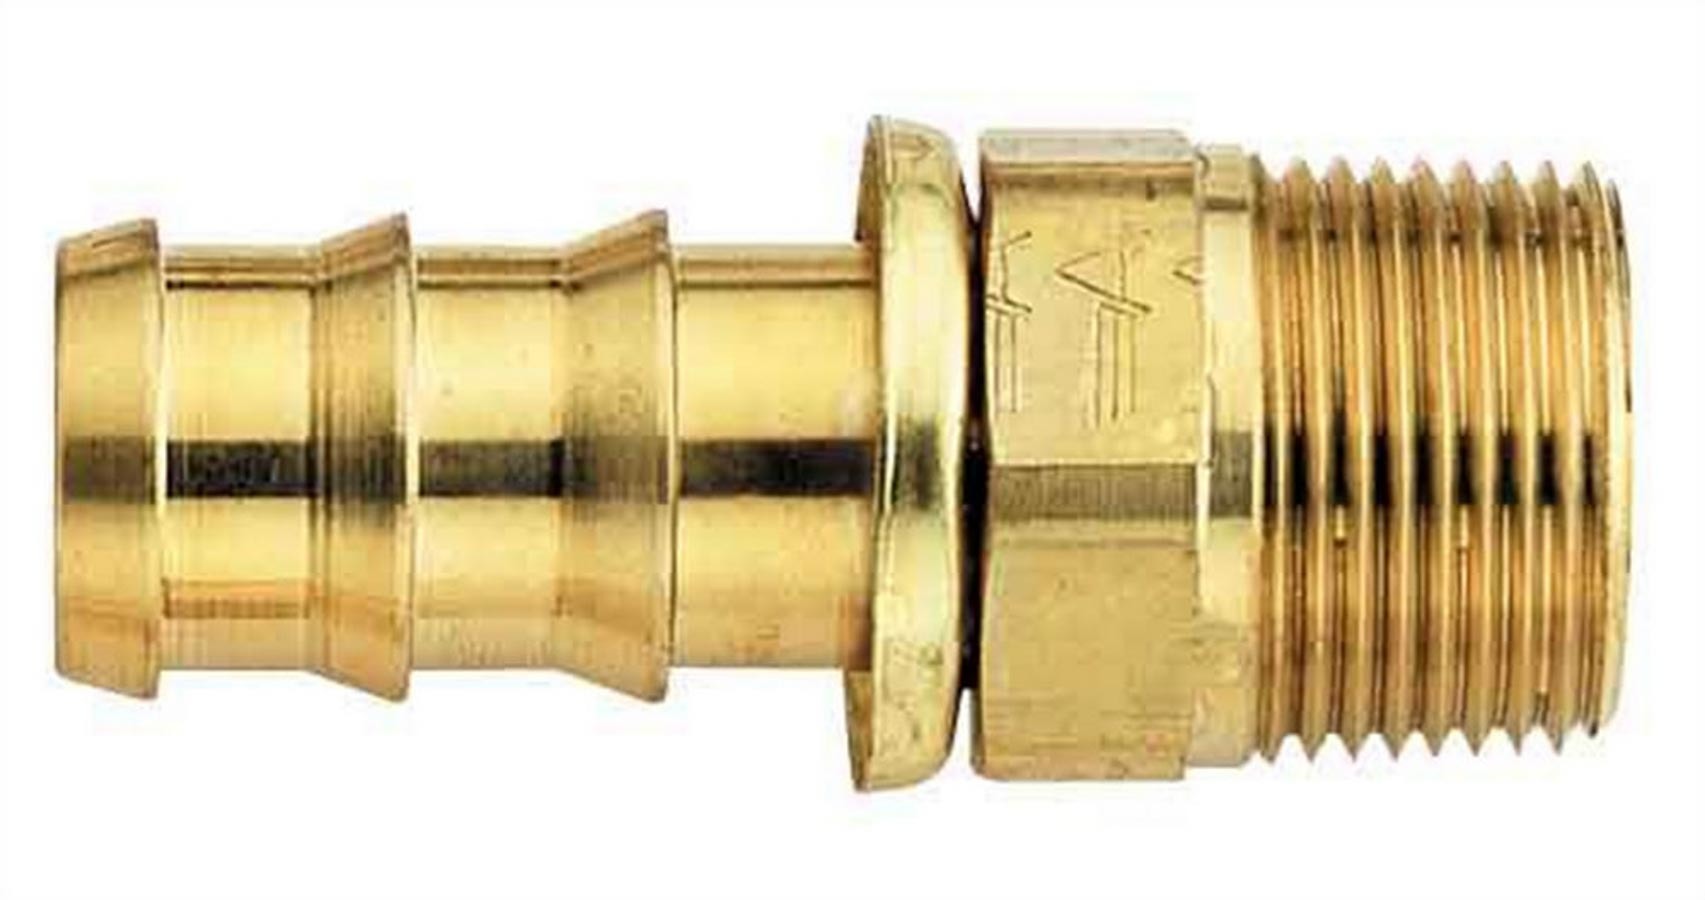 #4 Socketless Hose To 1/4 Male Pipe Fitting